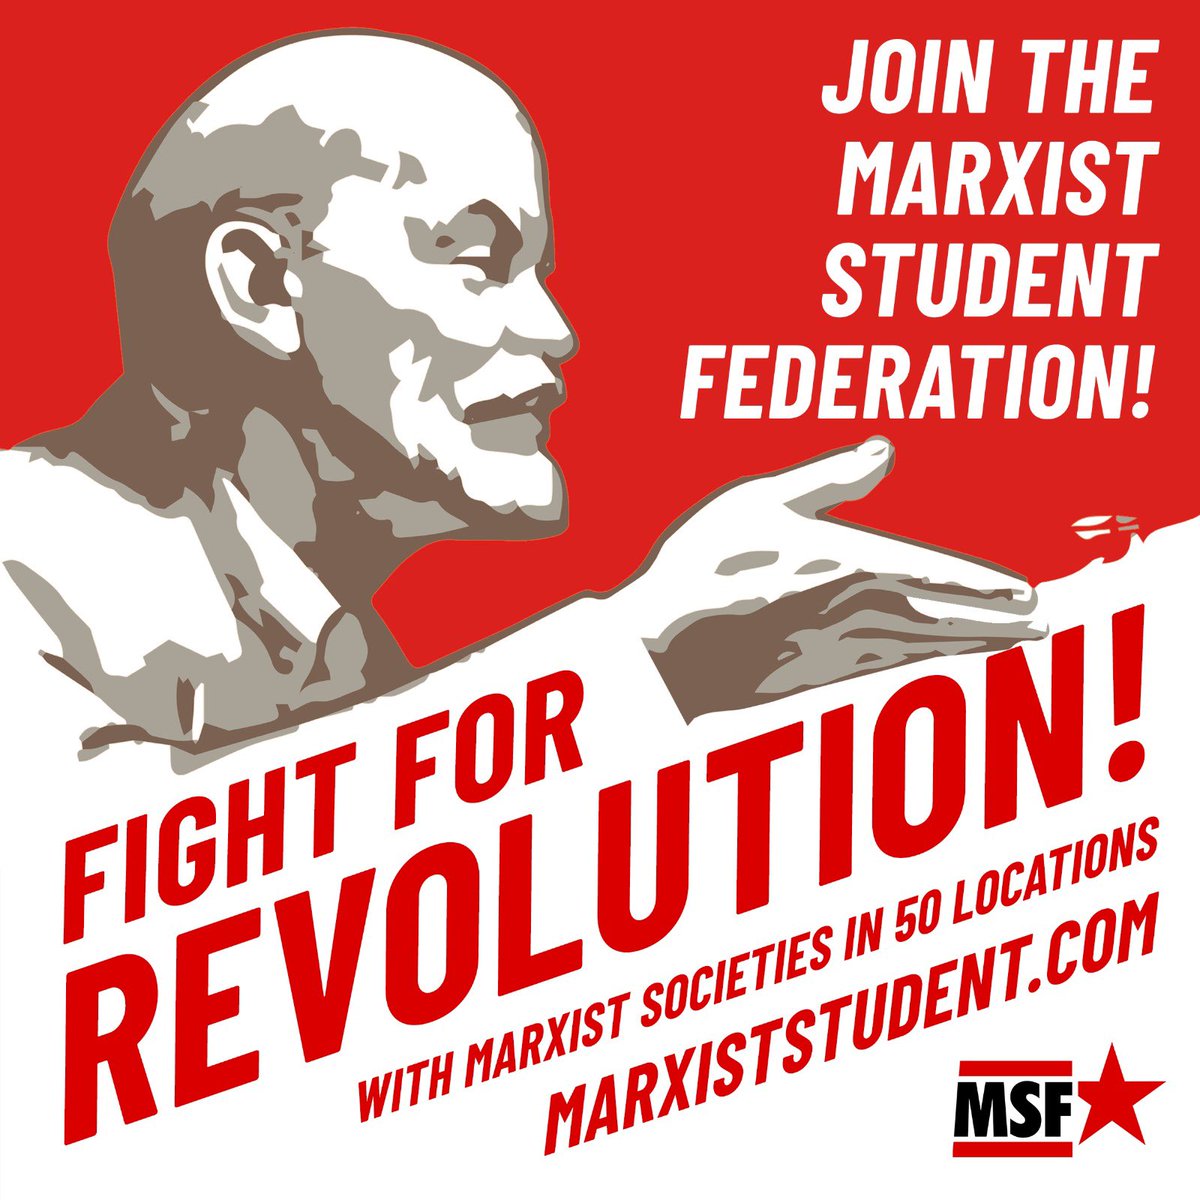 Congratulations to everyone who has received their results. If you’re heading to UEA - join the Marxist society today! DM us to get involved.

#alevelresults 
#alevelresultsday